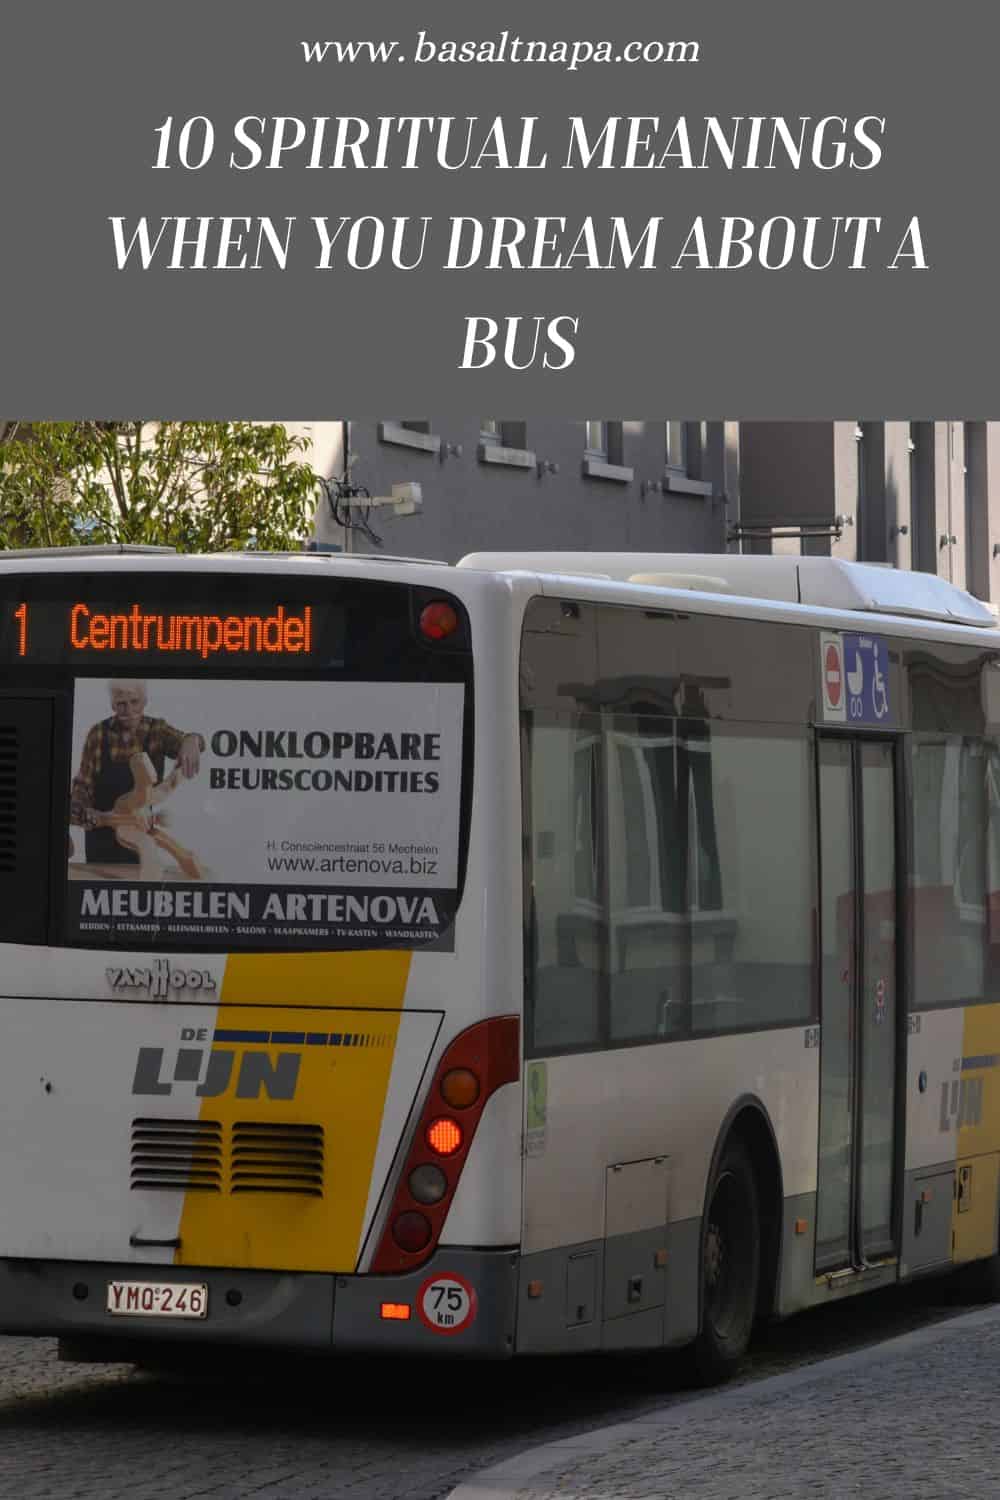 10 Spiritual Meanings When You Dream About A Bus